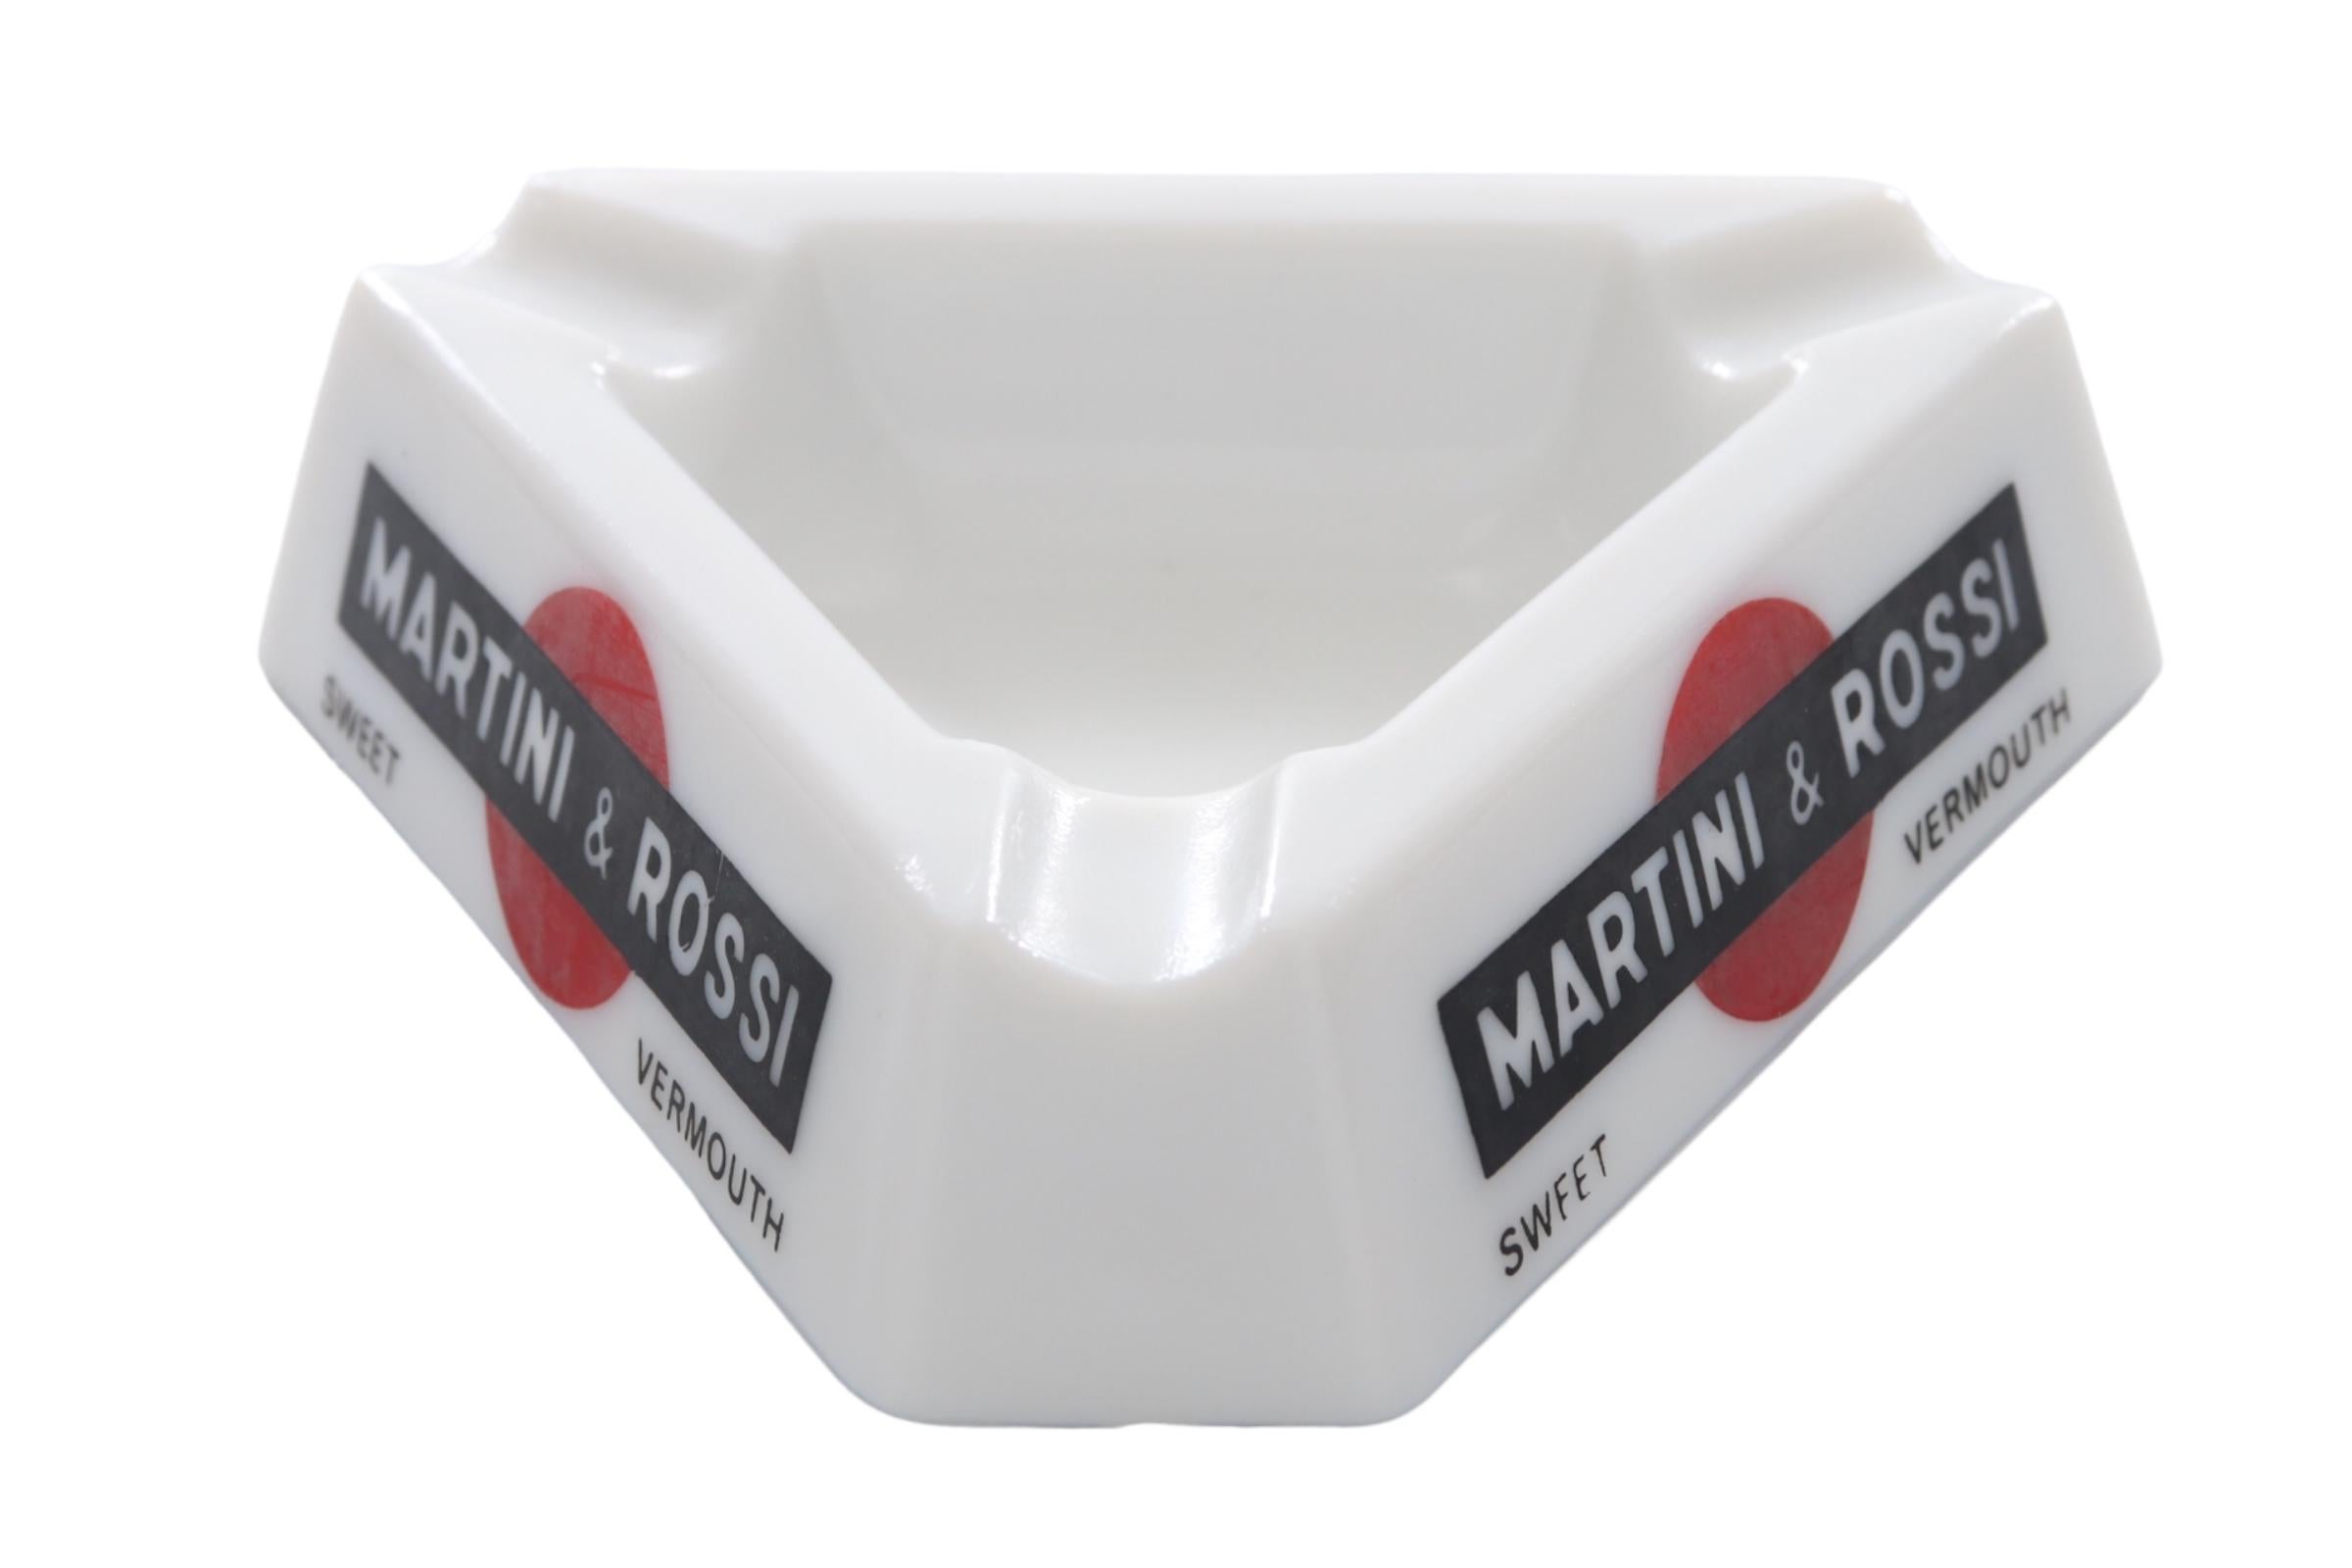 A pair of French Martini & Rossi triangular ashtrays. White Opalex is branded Martini & Rossi Sweet Vermouth on each side. Each corner has a beveled cigarette rest. Marked “Made in France, Renfield Importers, New York, NY” underneath. Dimensions per